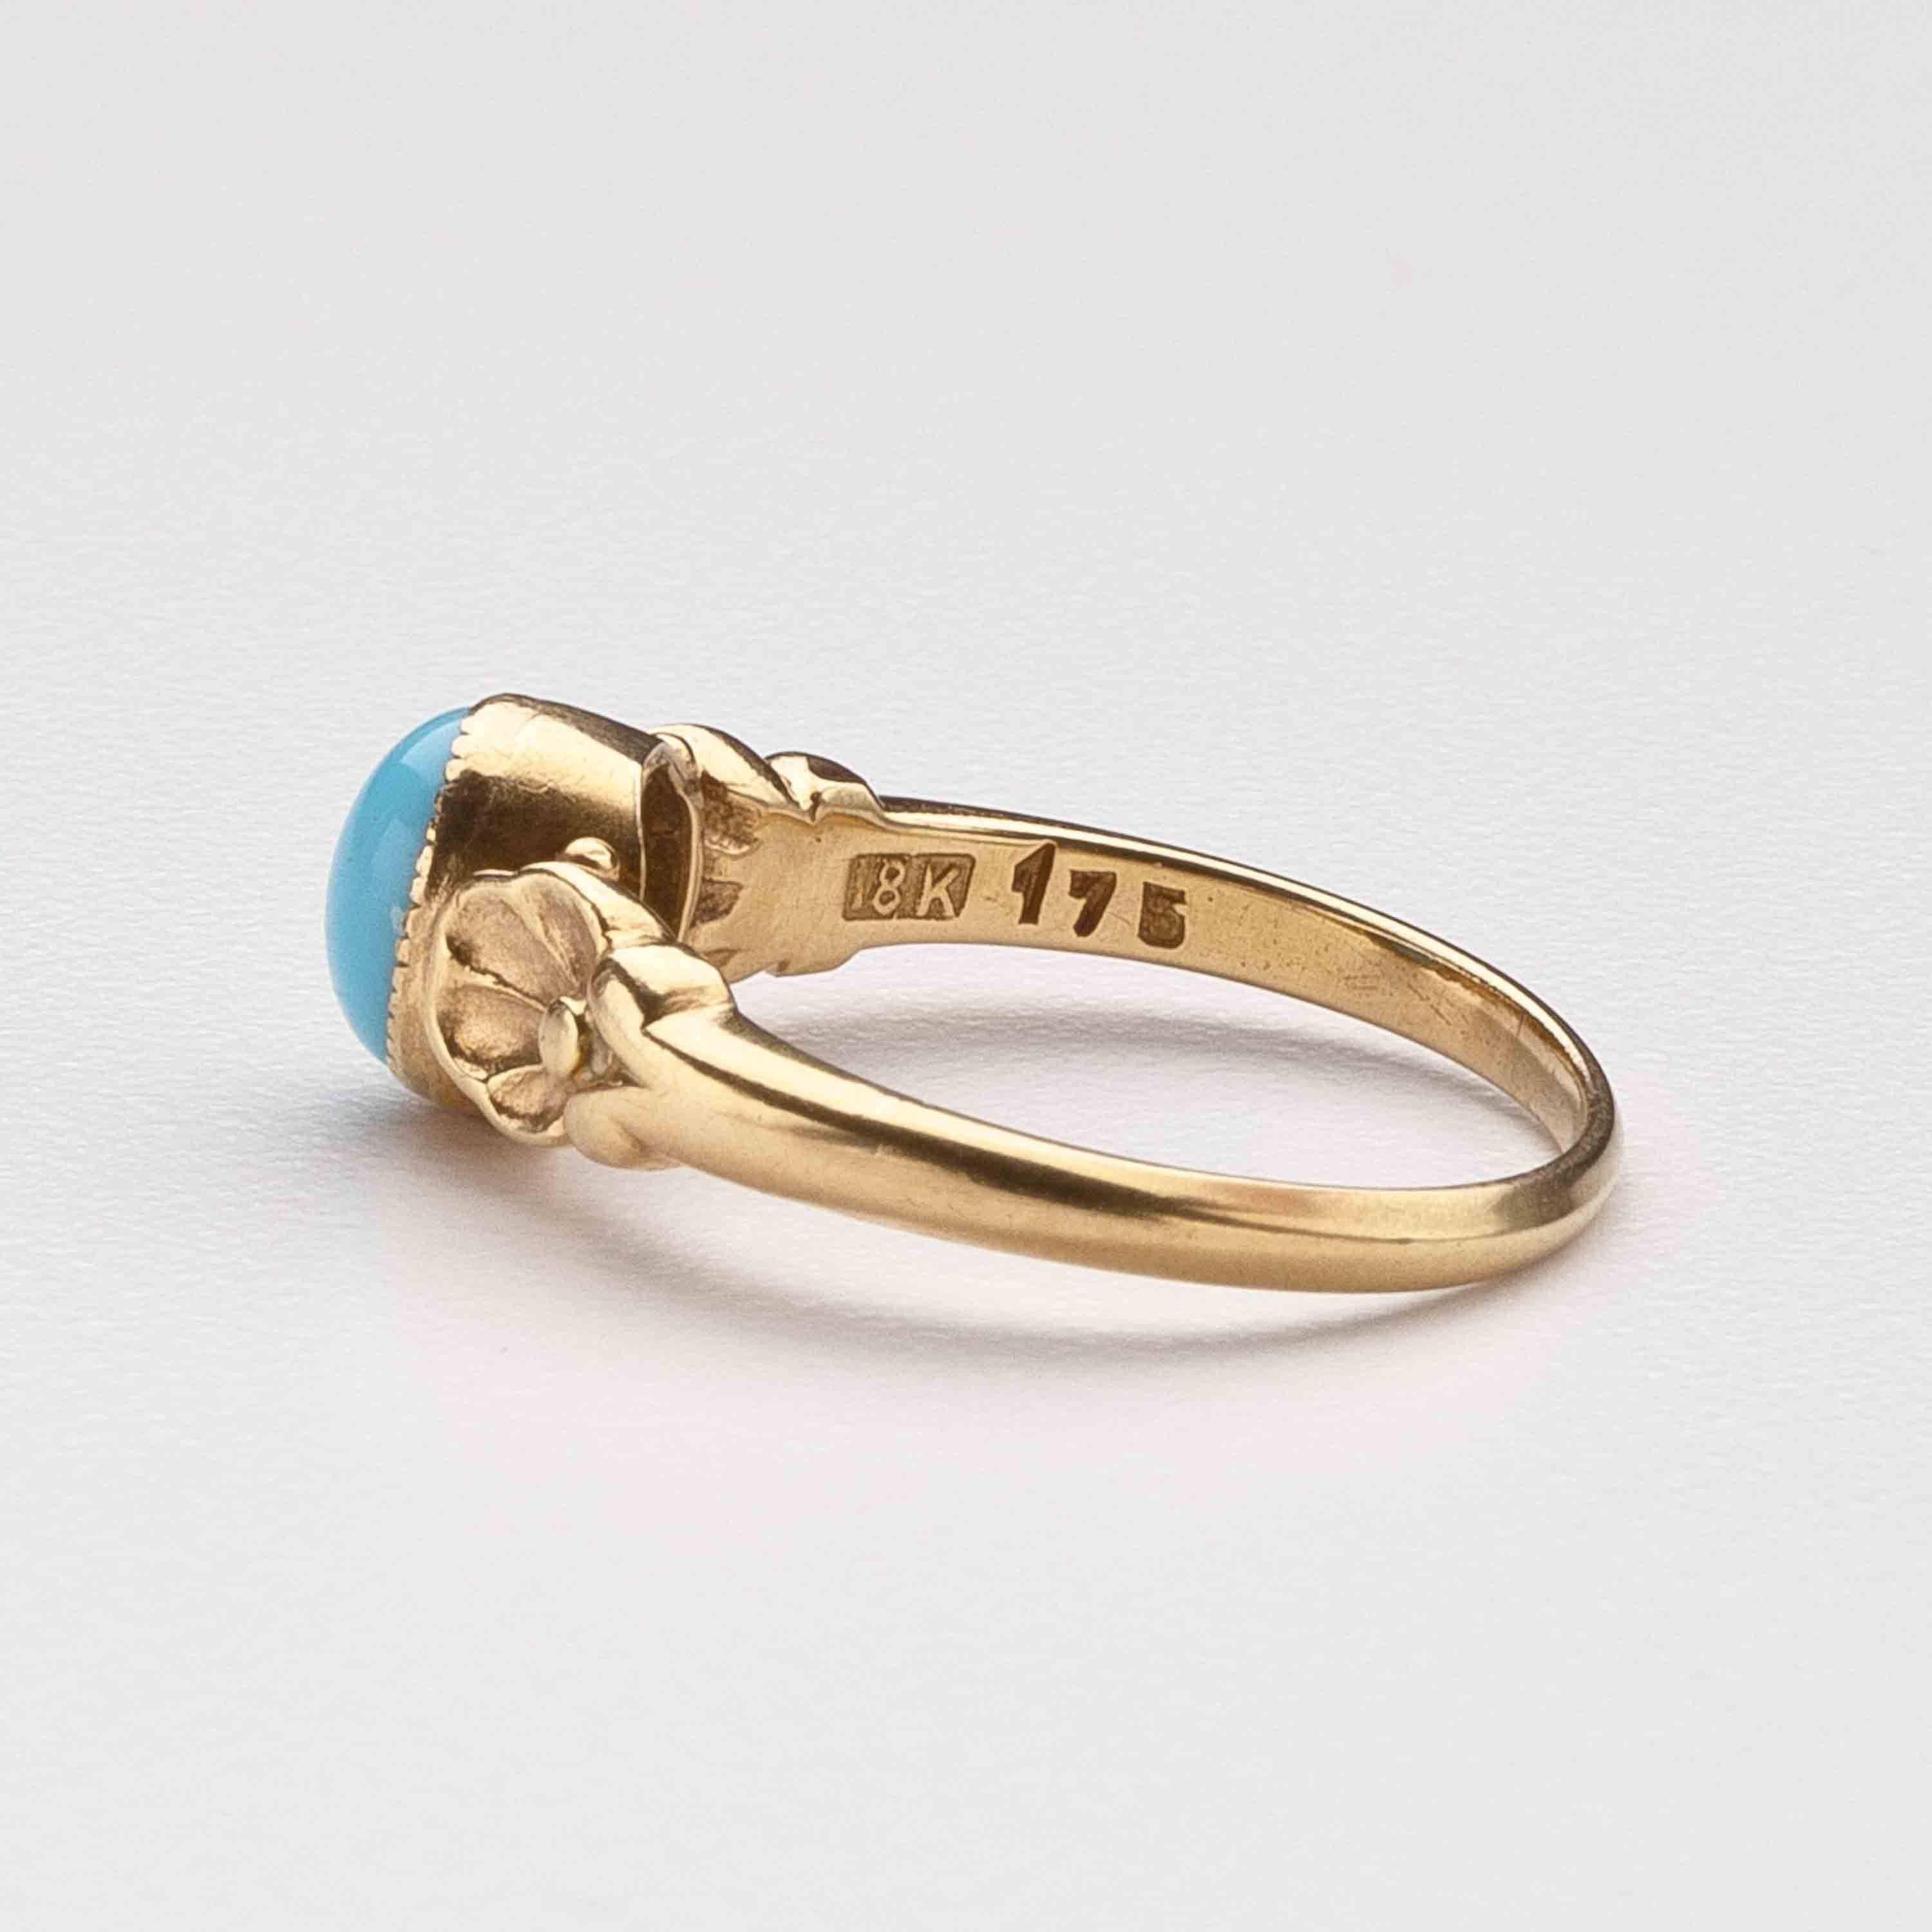 Georg Jensen Turquoise Gold Ring No. 175  In Excellent Condition For Sale In Mt. Kisco, NY